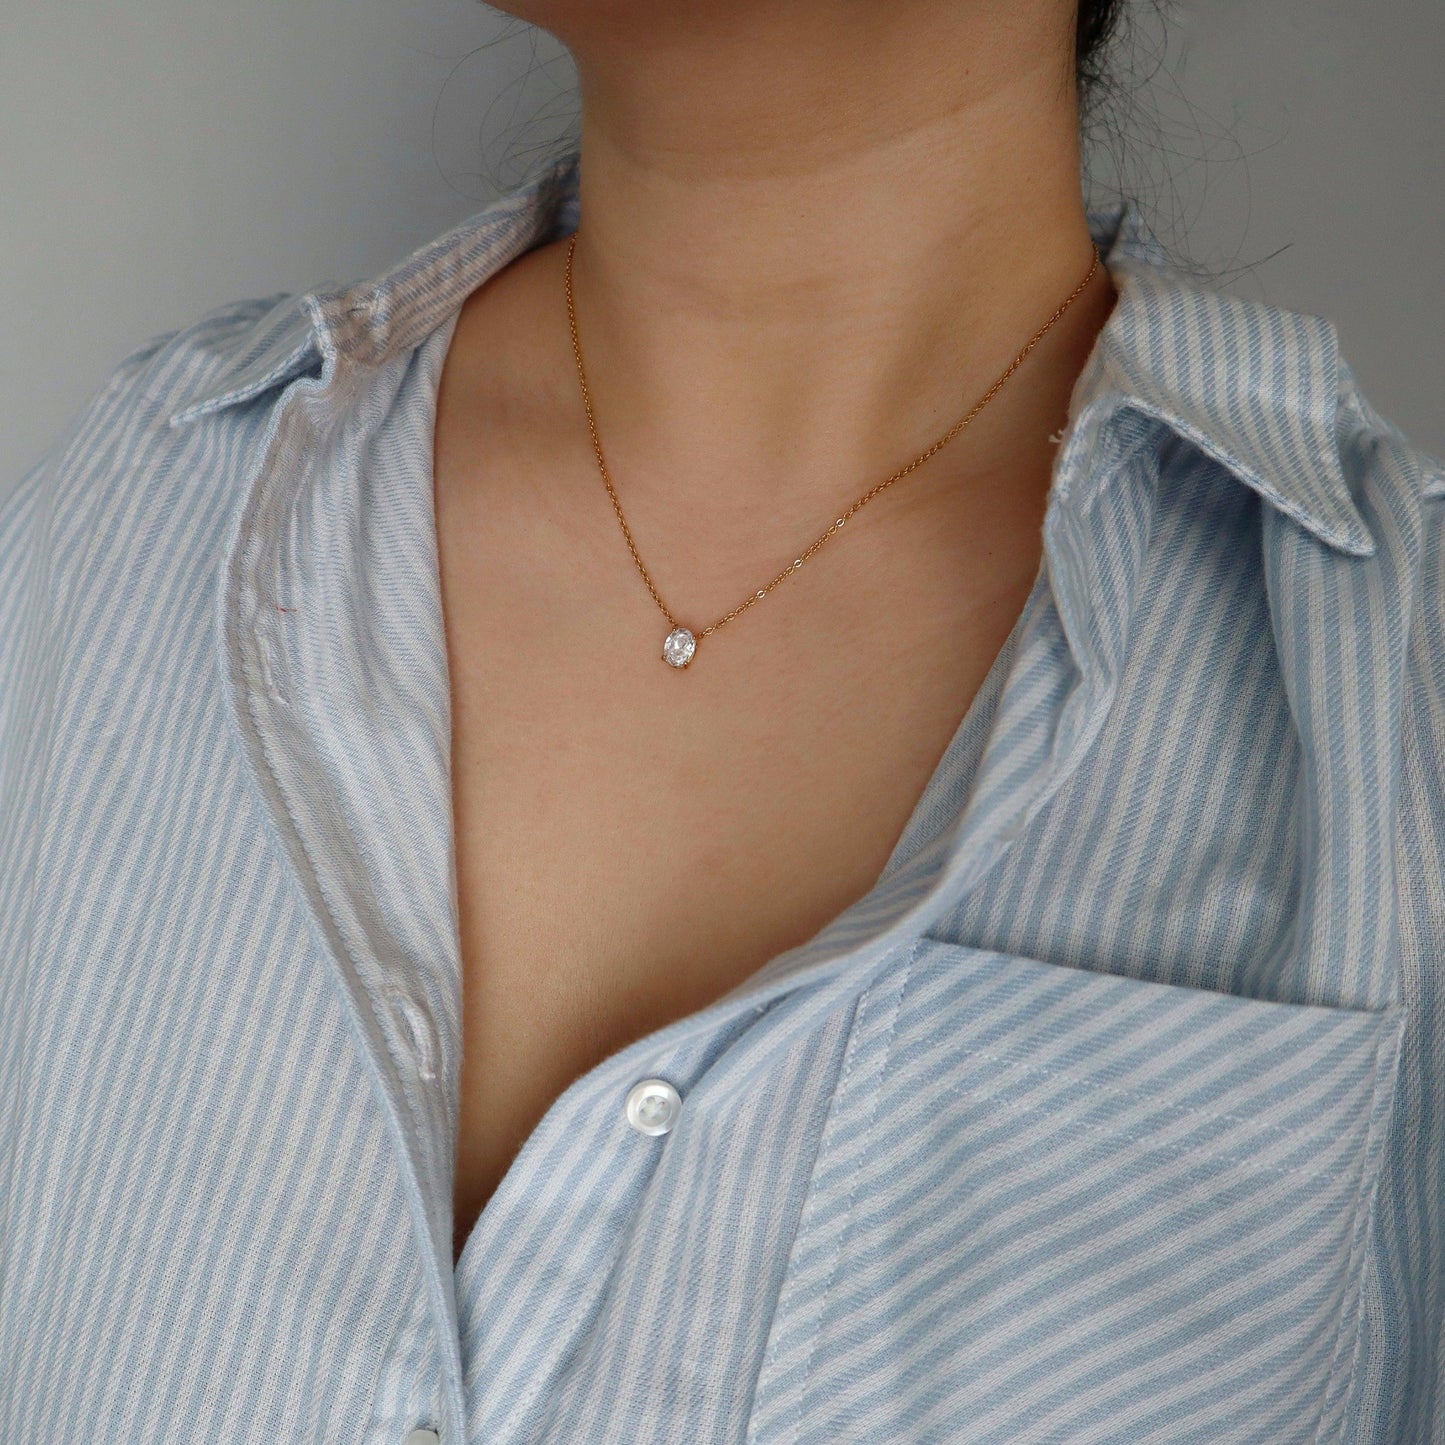 Oval Solitaire Necklace - JESSA JEWELRY | GOLD JEWELRY; dainty, affordable gold everyday jewelry. Tarnish free, water-resistant, hypoallergenic. Jewelry for everyday wear